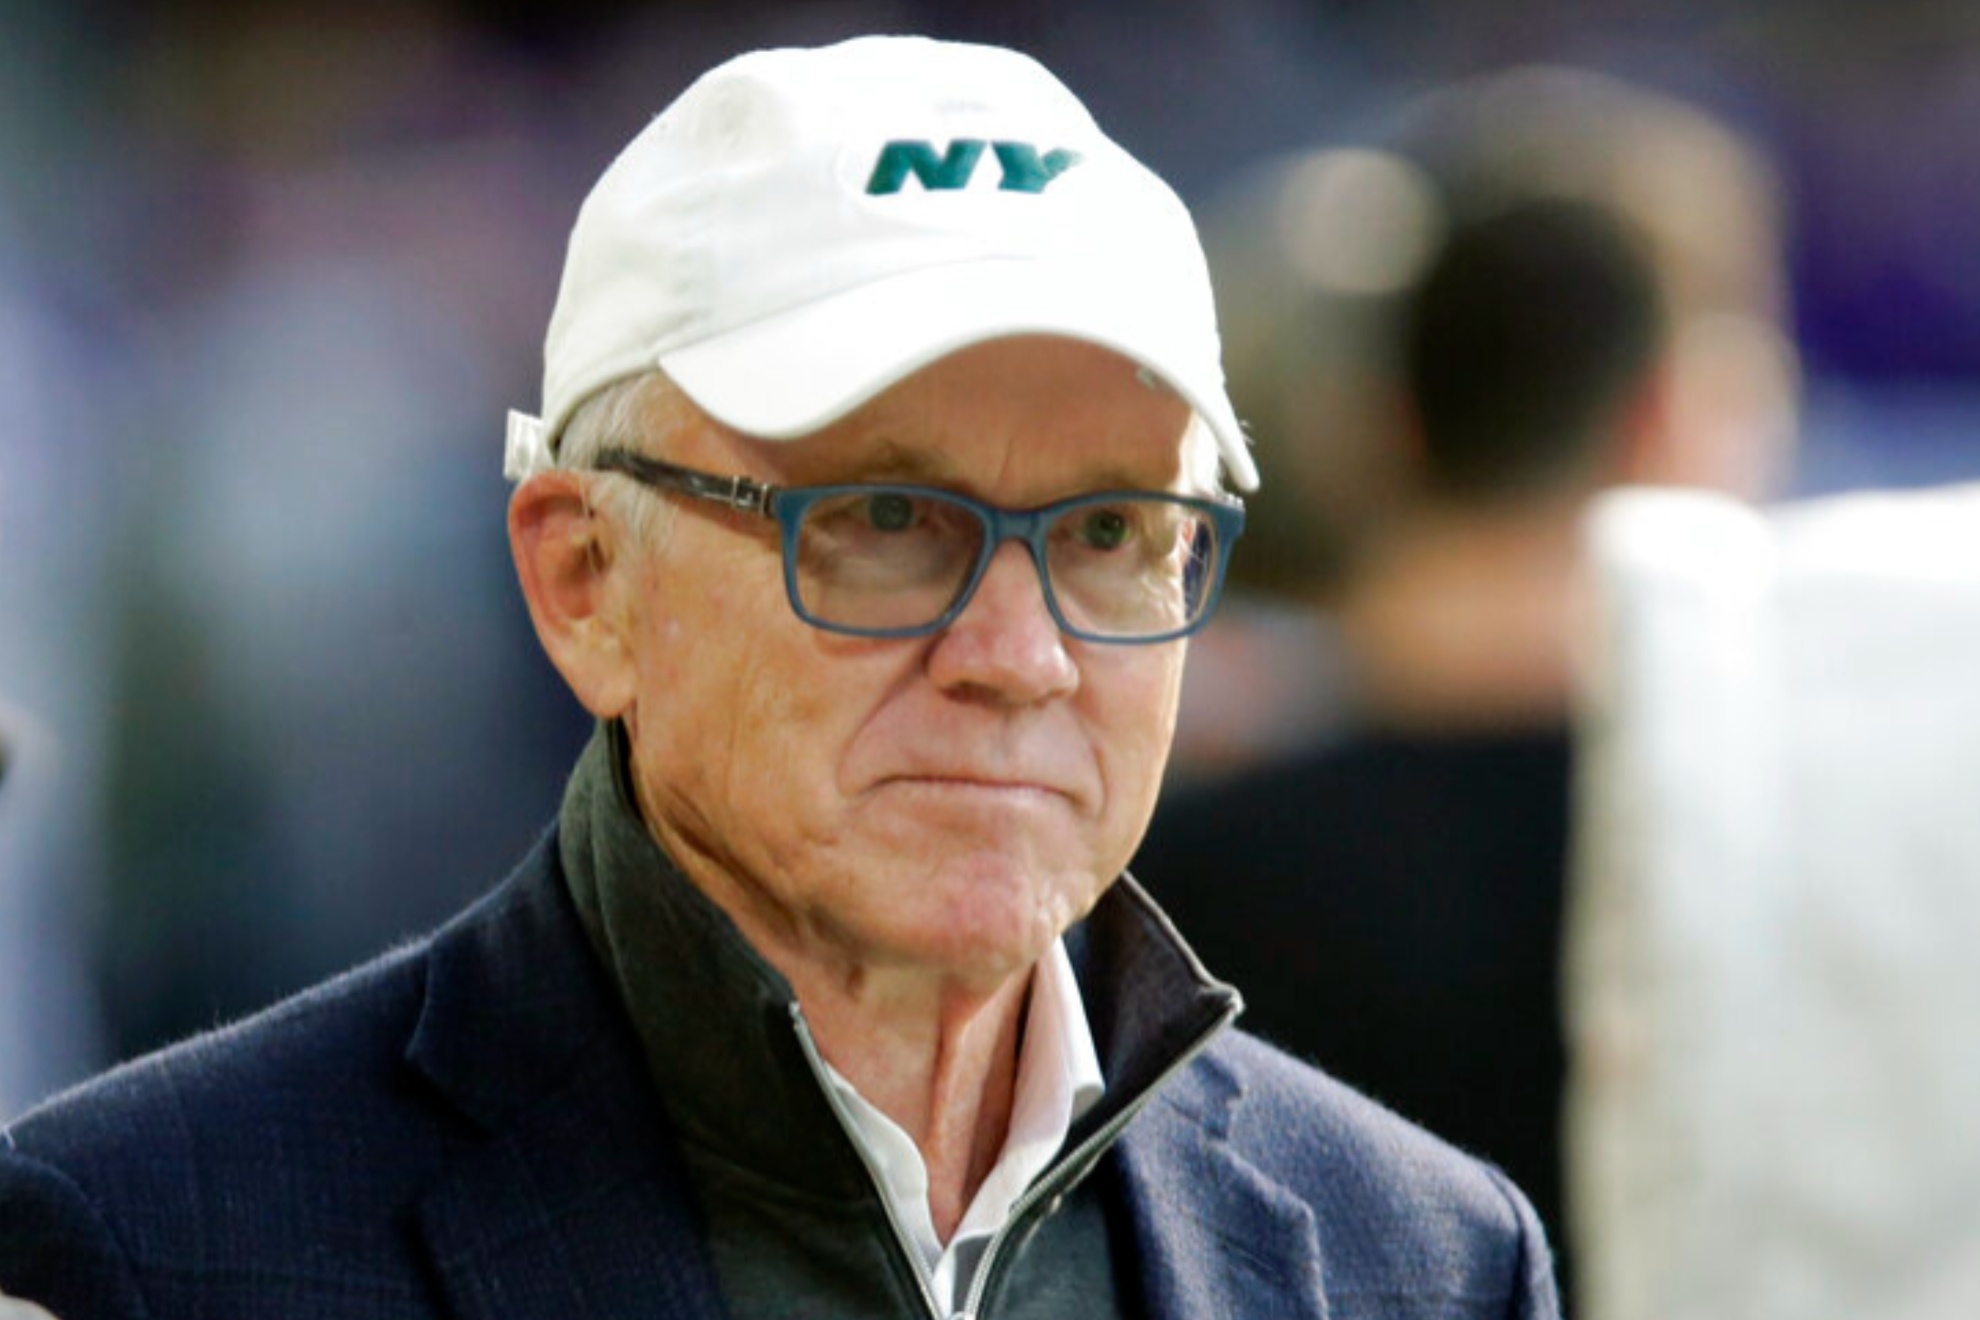 Woody Johnson purchased the New York Jets in 2000 for $635 million